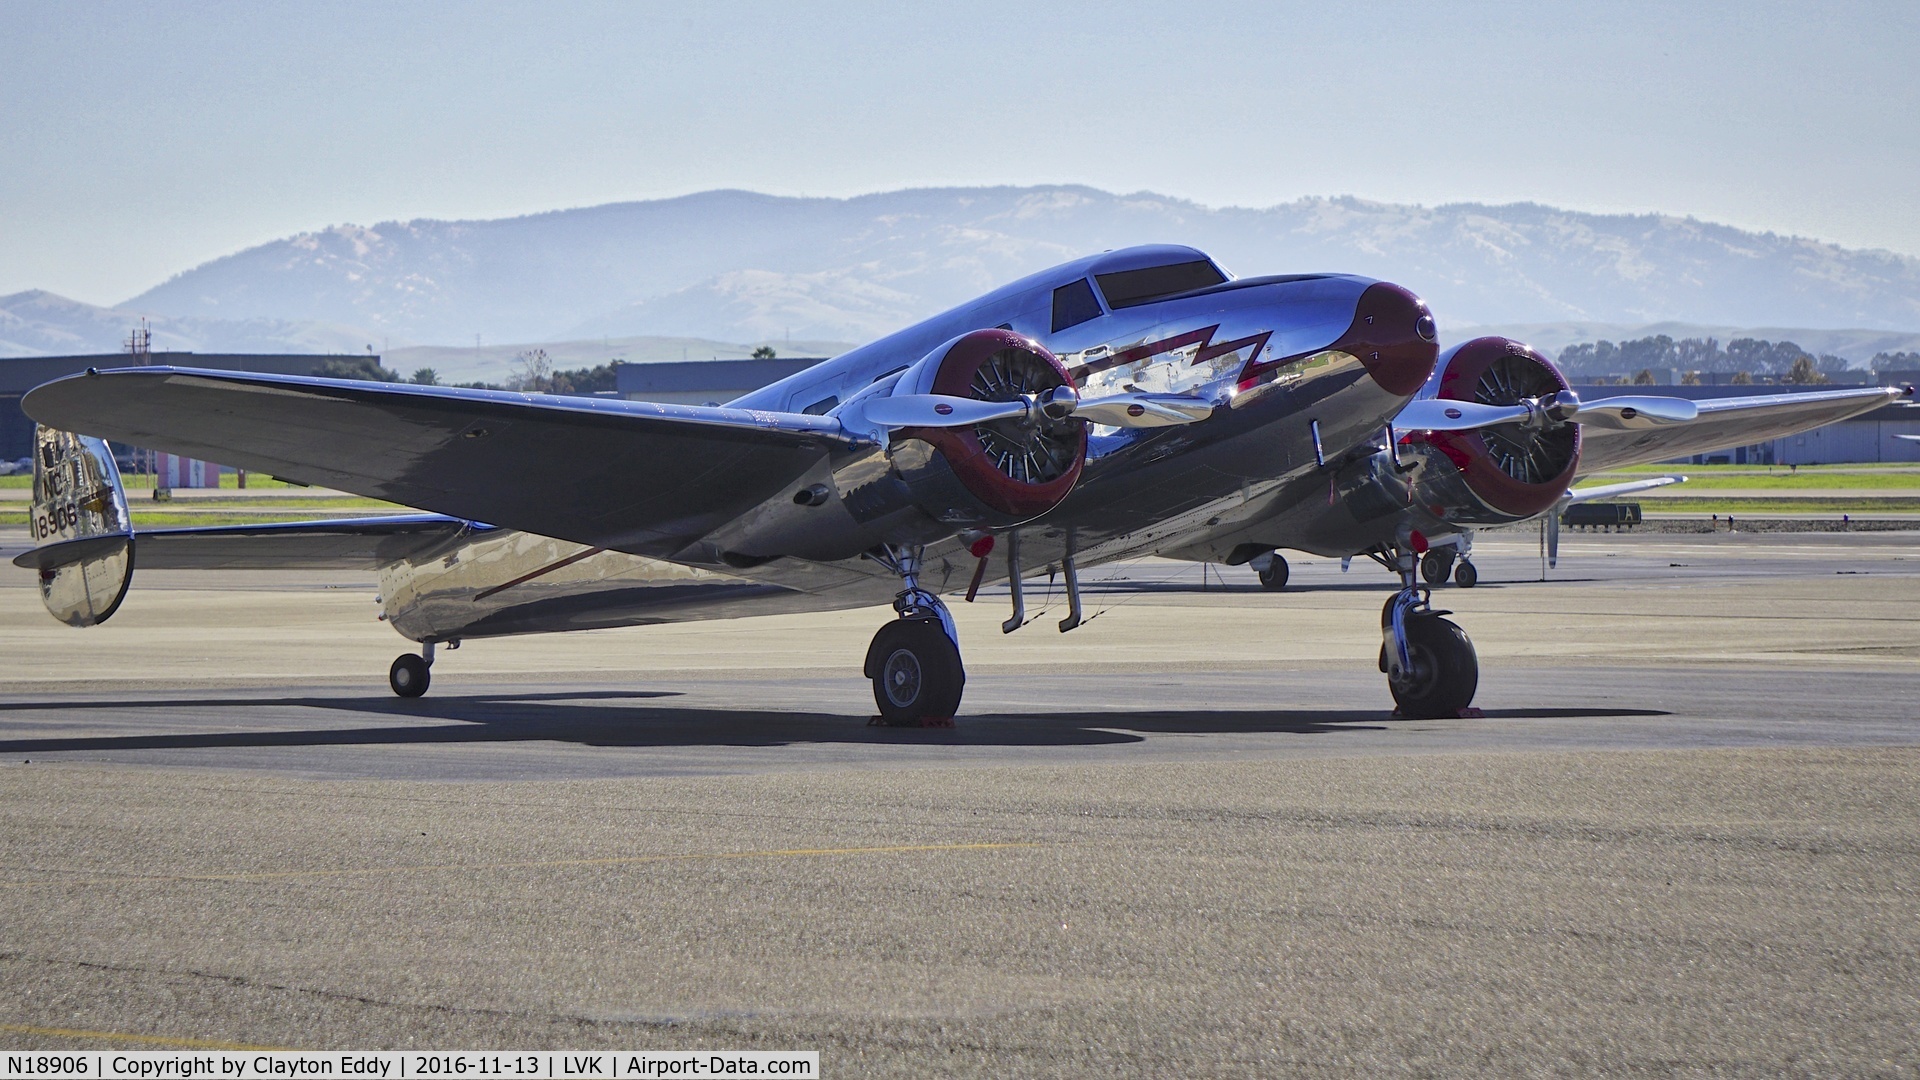 N18906, Lockheed 12A Electra Junior C/N 1277, N18906 on the ramp at Livermore Airport. 2016.